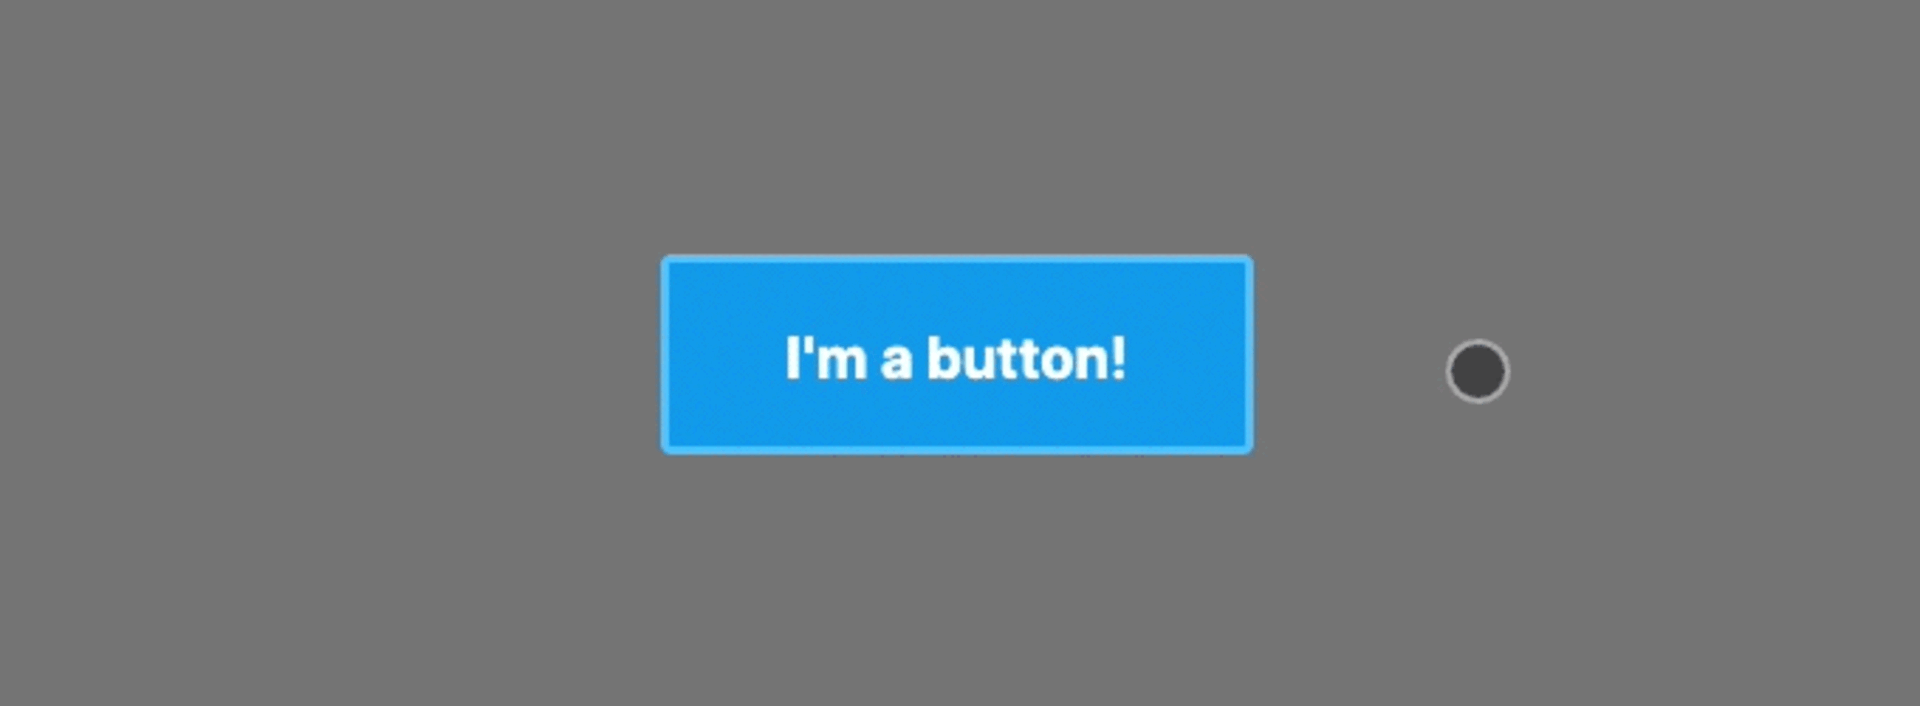 gif showing a button that changes color from blue to red while being clicked